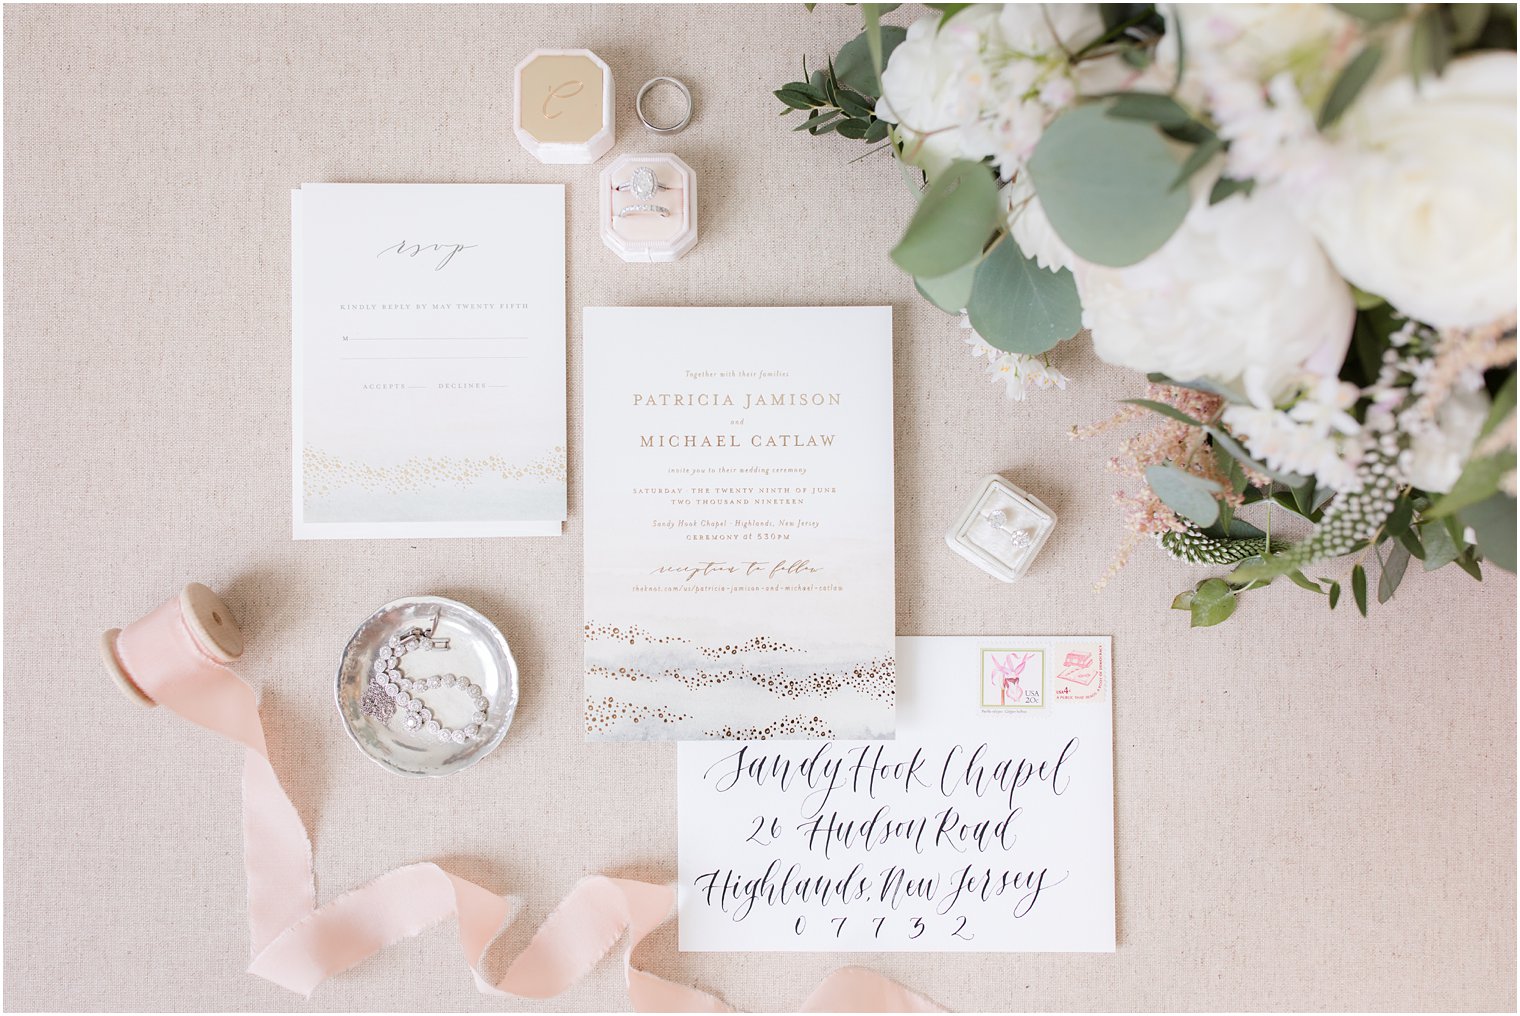 Classic Sandy Hook Chapel wedding invitations from Minted photographed by Idalia Photography